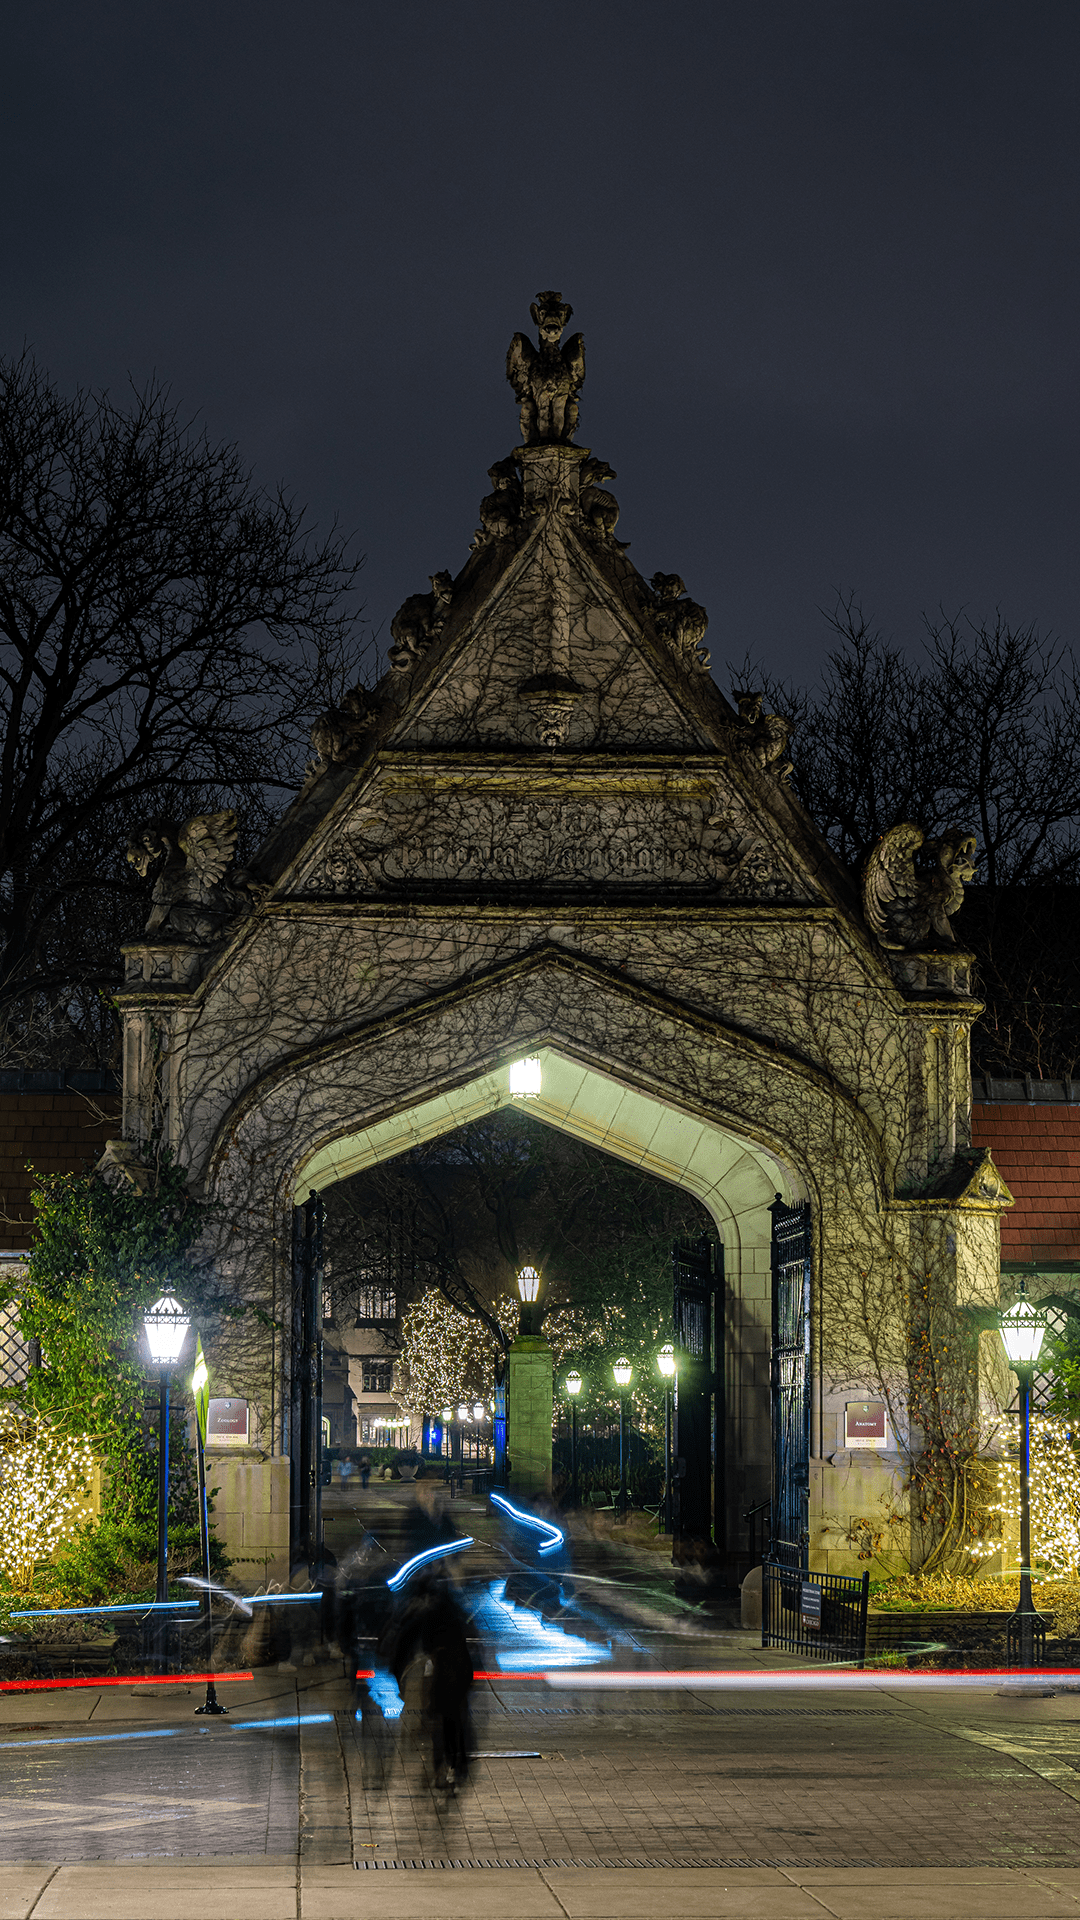 Gothic arch at night with time lapse traffic lights passing in front.